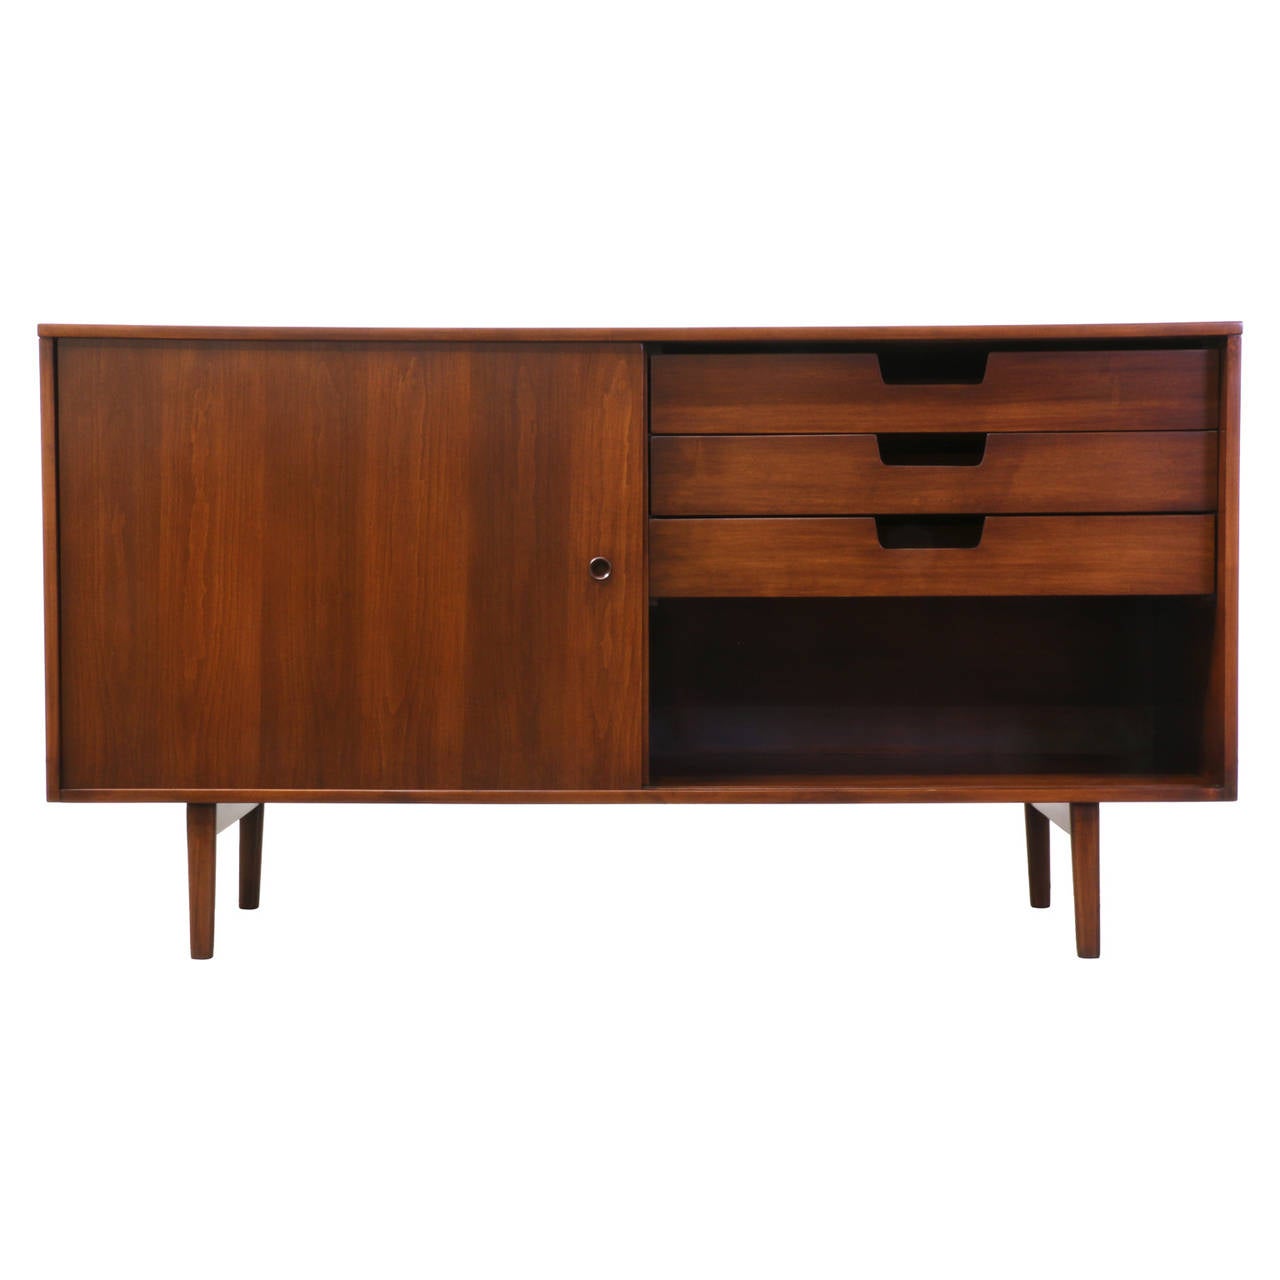 American Paul McCobb “Planner Group” Credenza for Winchendon Furniture